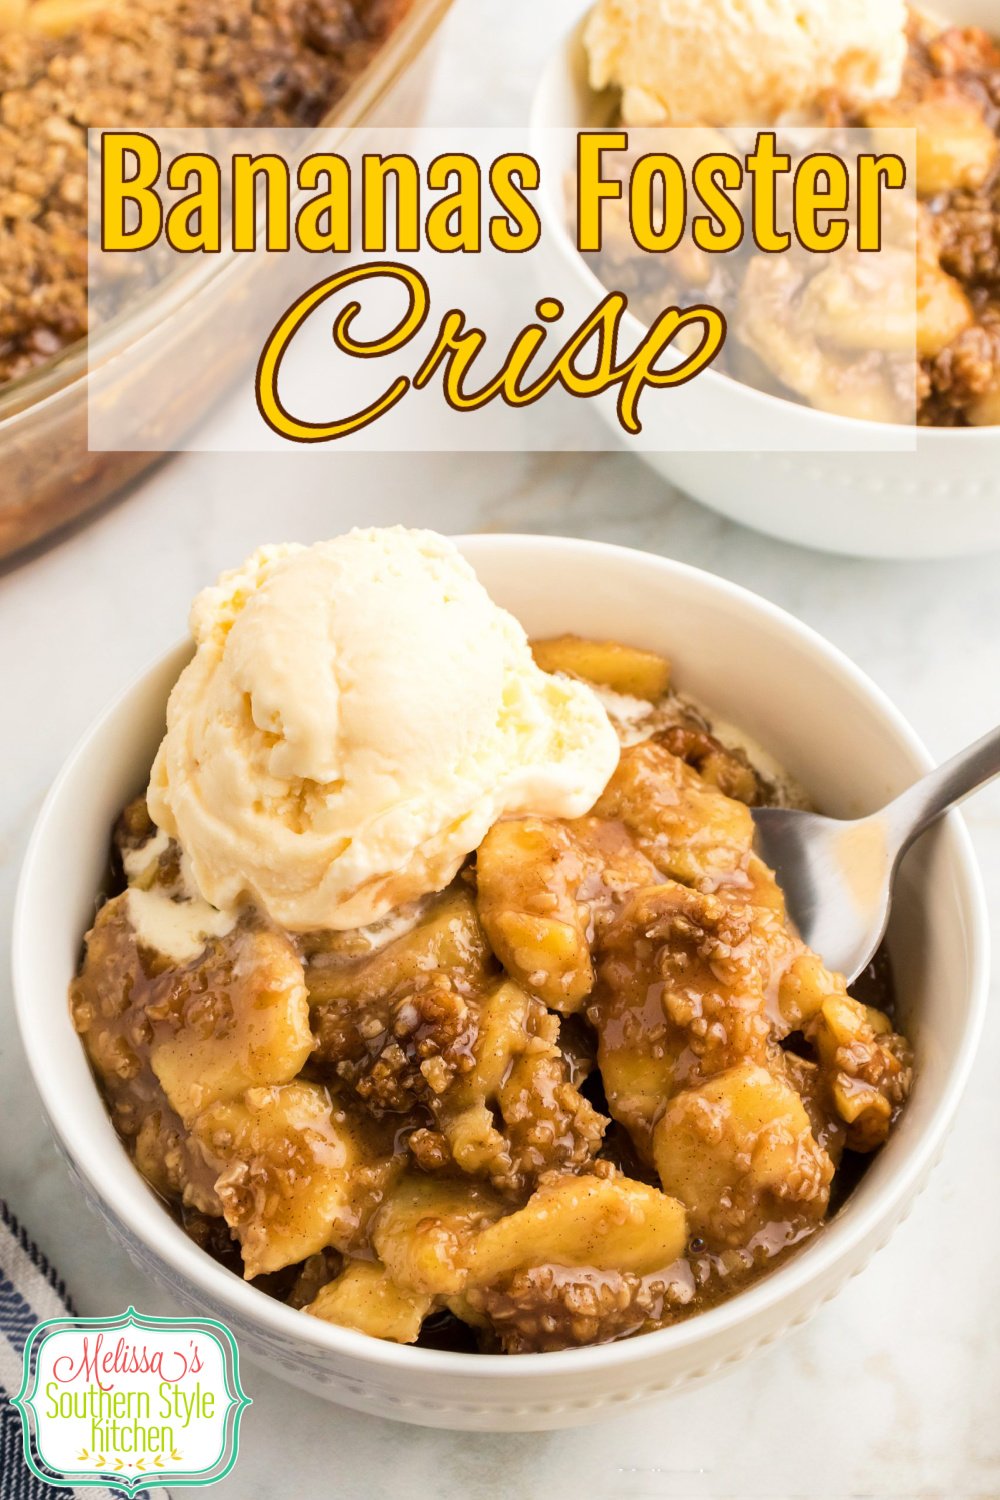 This Bananas Foster Crisp is a riff on a NOLA classic that features bananas covered in a rich caramel sauce and baked with a crispy topping. #bananasfoster #bananadesserts #bananacrisp #caramel #bananas #crisprecipes #southerndesserts #NOLA #mardigras